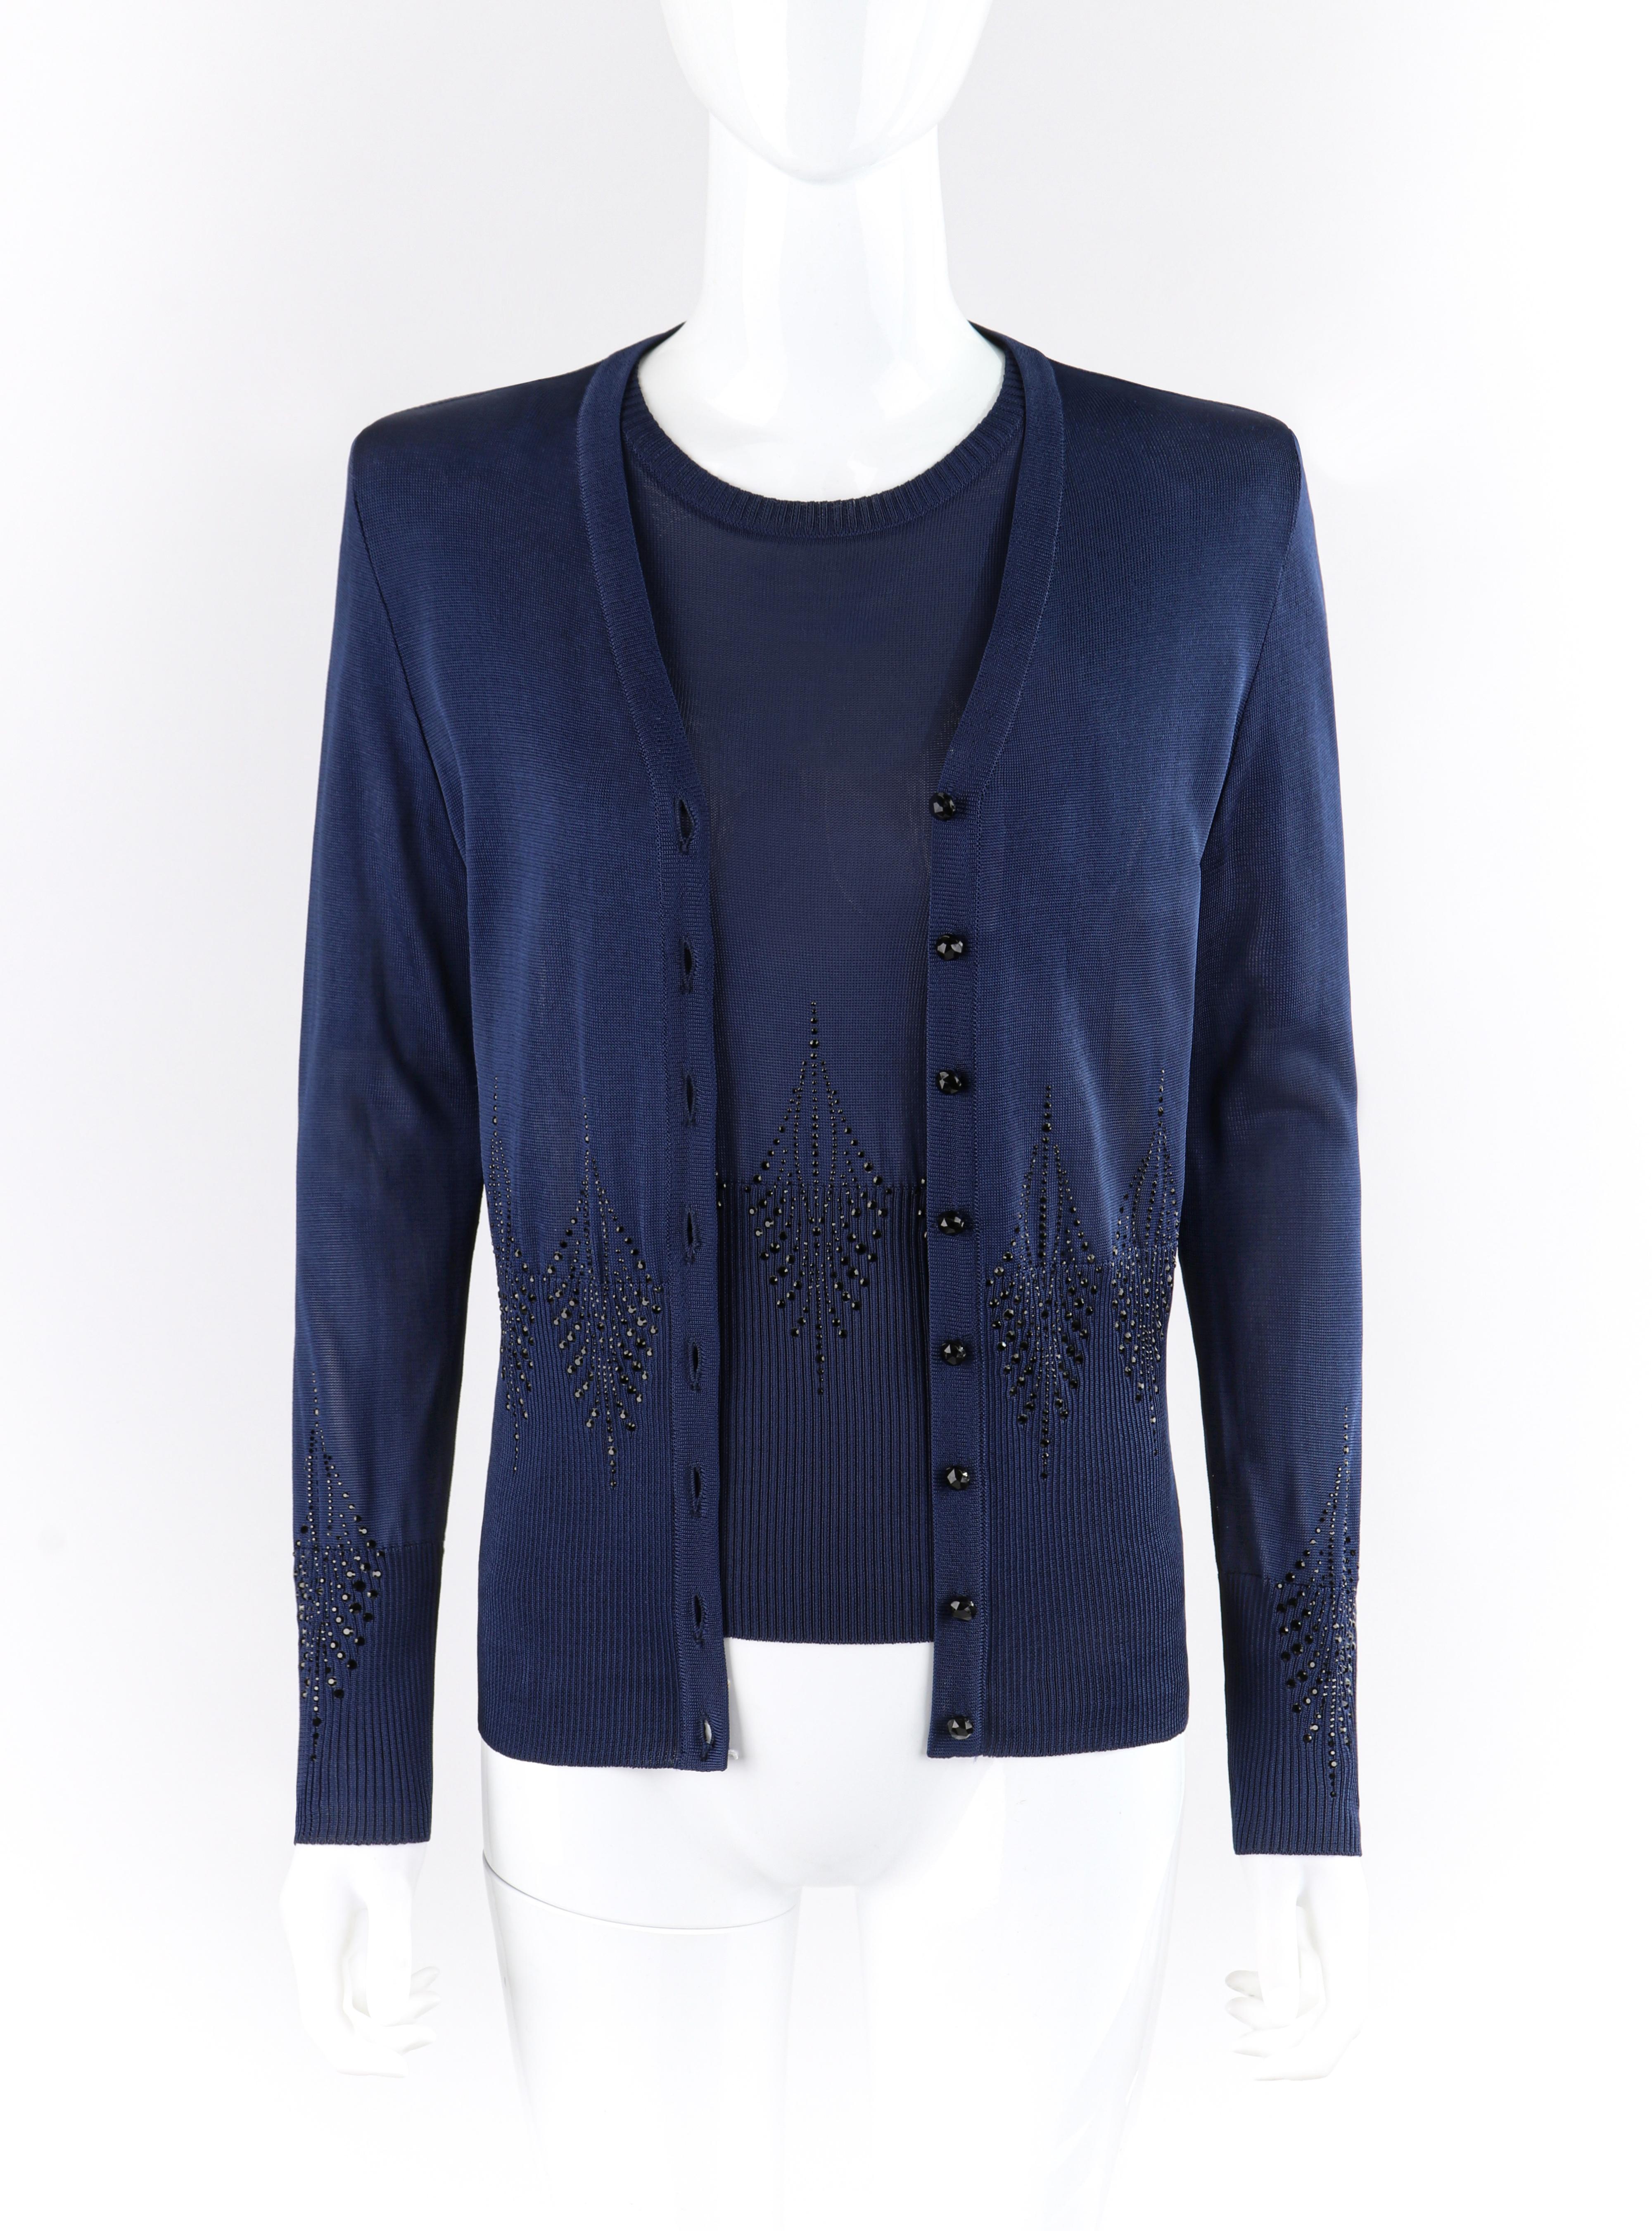 GIVENCHY Couture A/W 1998 ALEXANDER McQUEEN Embellished Knit Top Cardigan Set
Brand / Manufacturer: Givenchy Couture
Collection: A/W 1998
Designer: Alexander McQueen
Style: Knit short sleeve top; mesh knit cardigan
Color(s): Shades of blue
Lined: